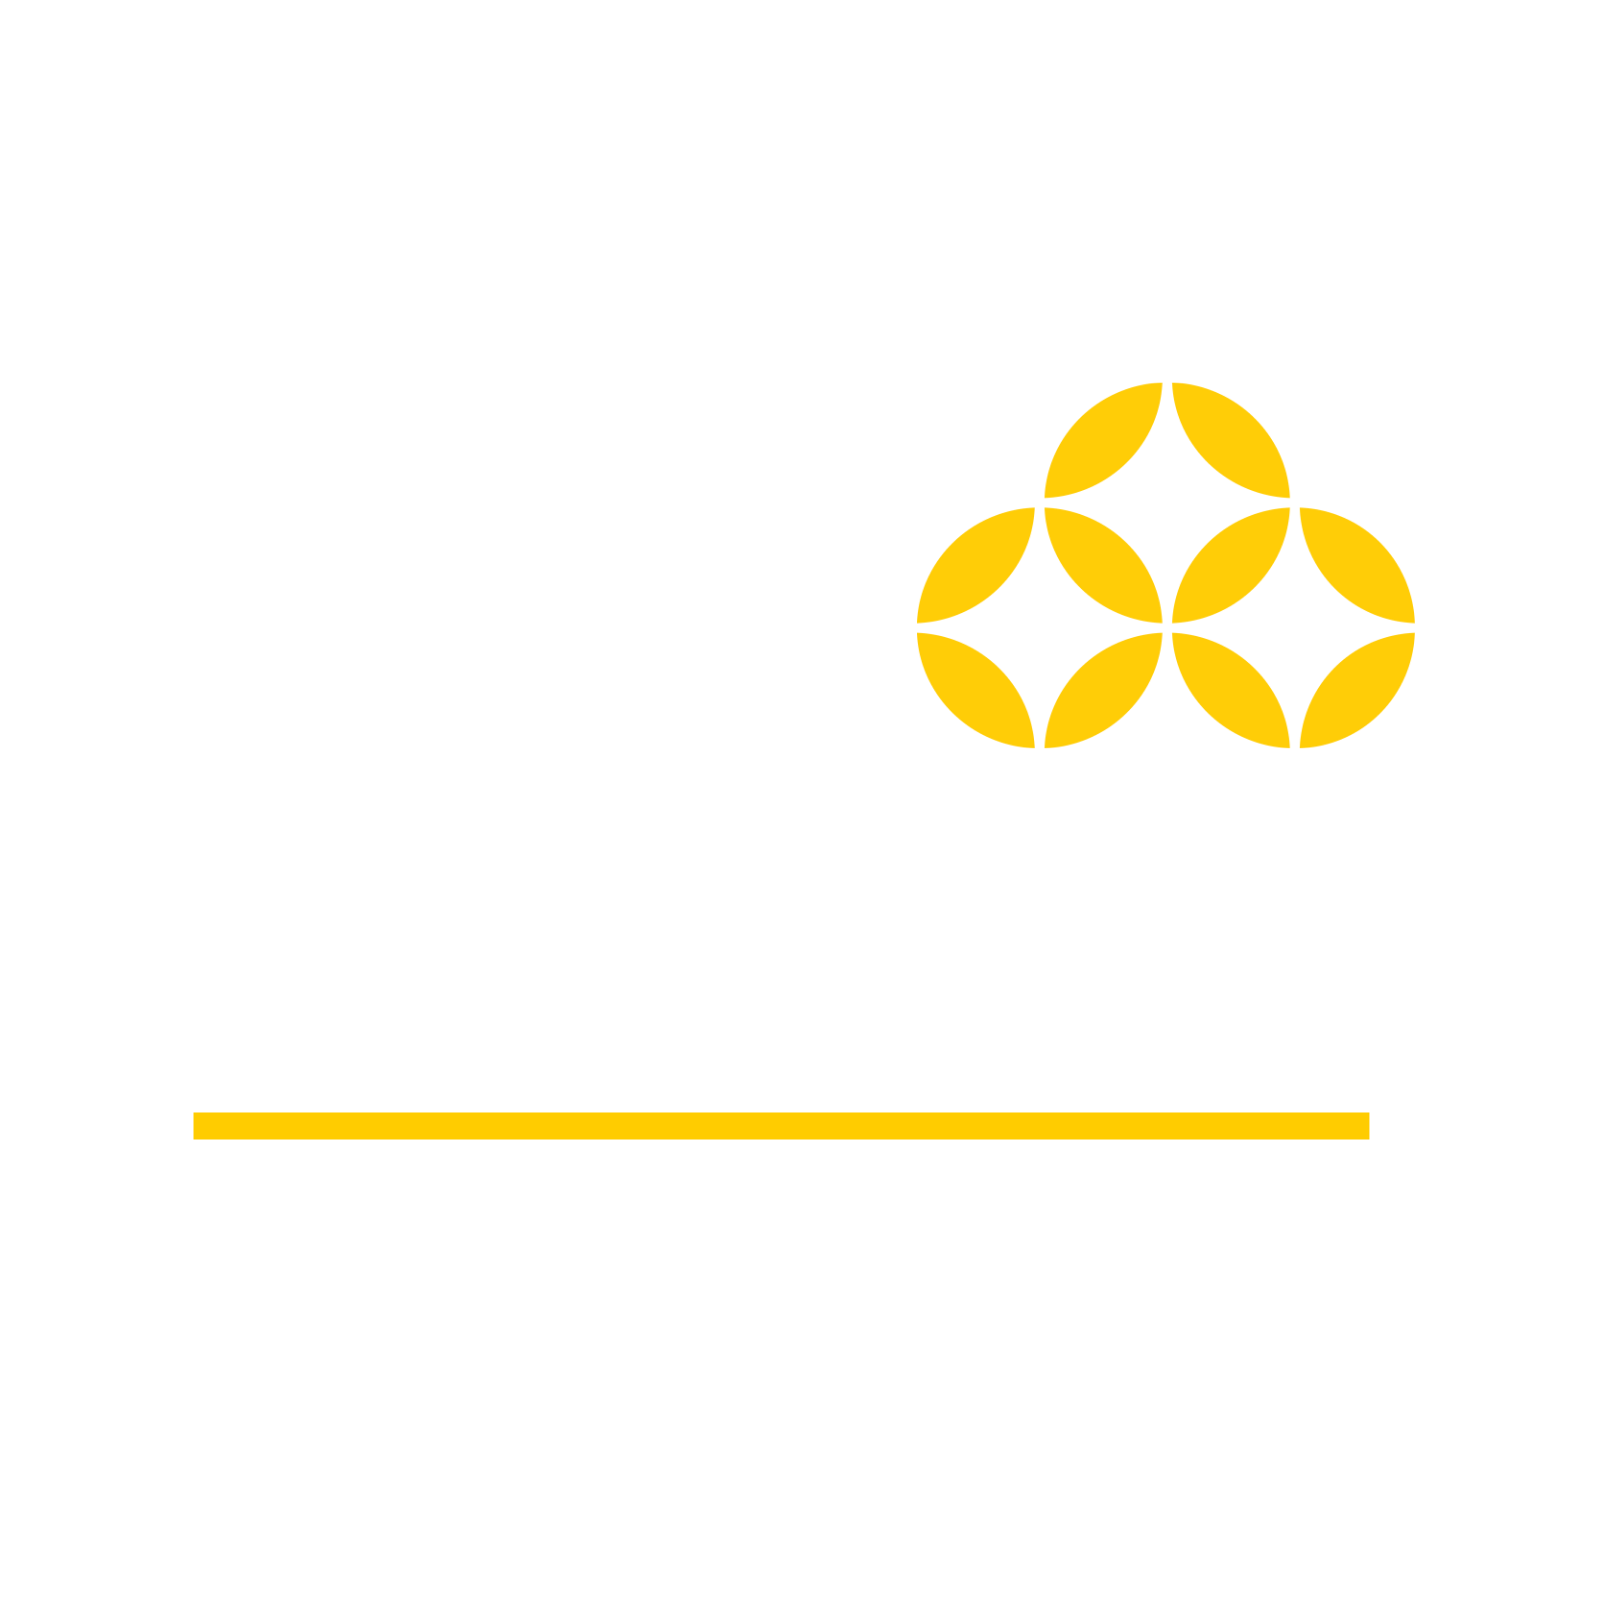 Illustration with stylized text: Give Bright